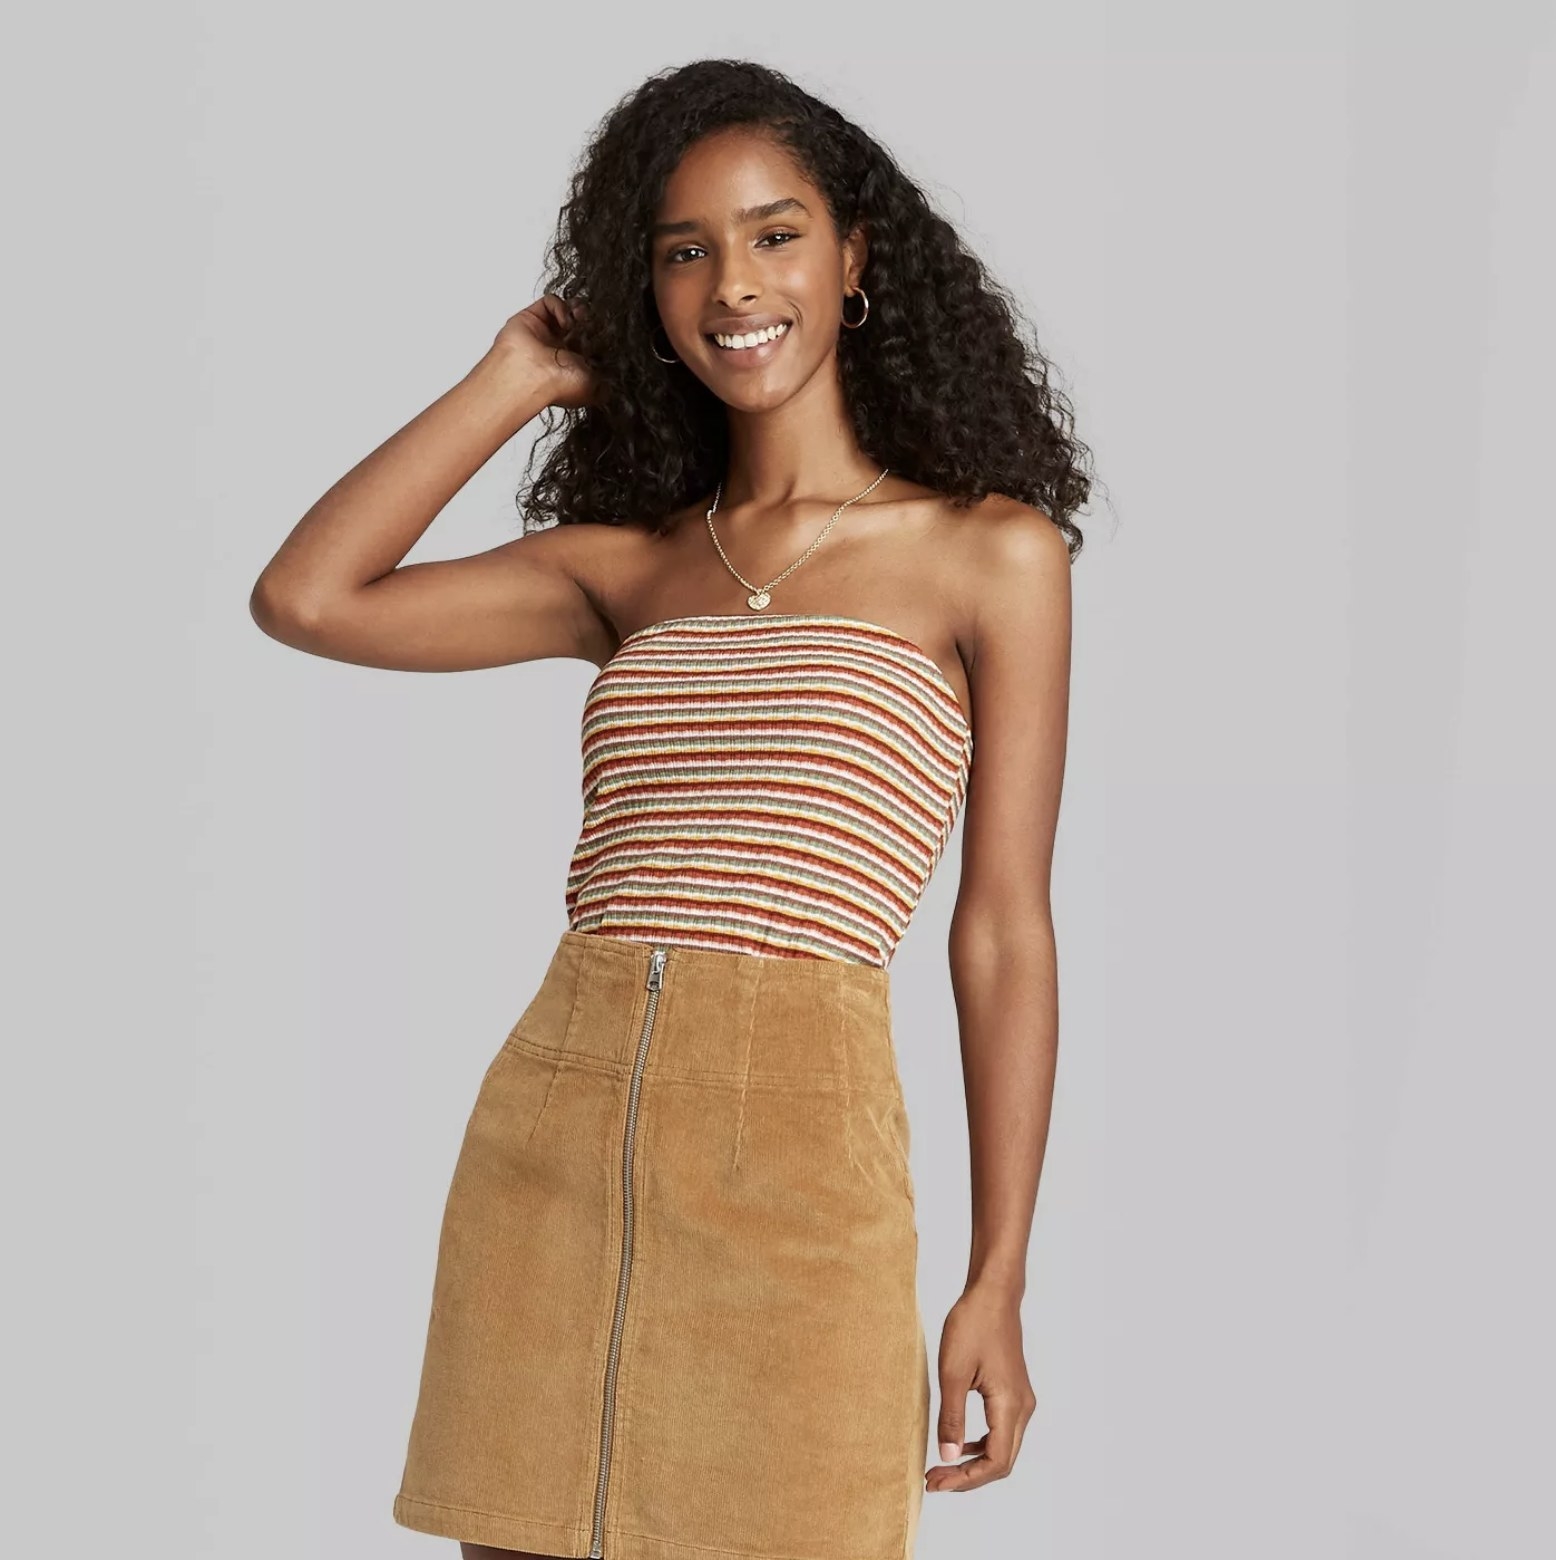 Model is wearing a cropped burnt orange, light grey, and cream striped tube top with a textured rib pattern